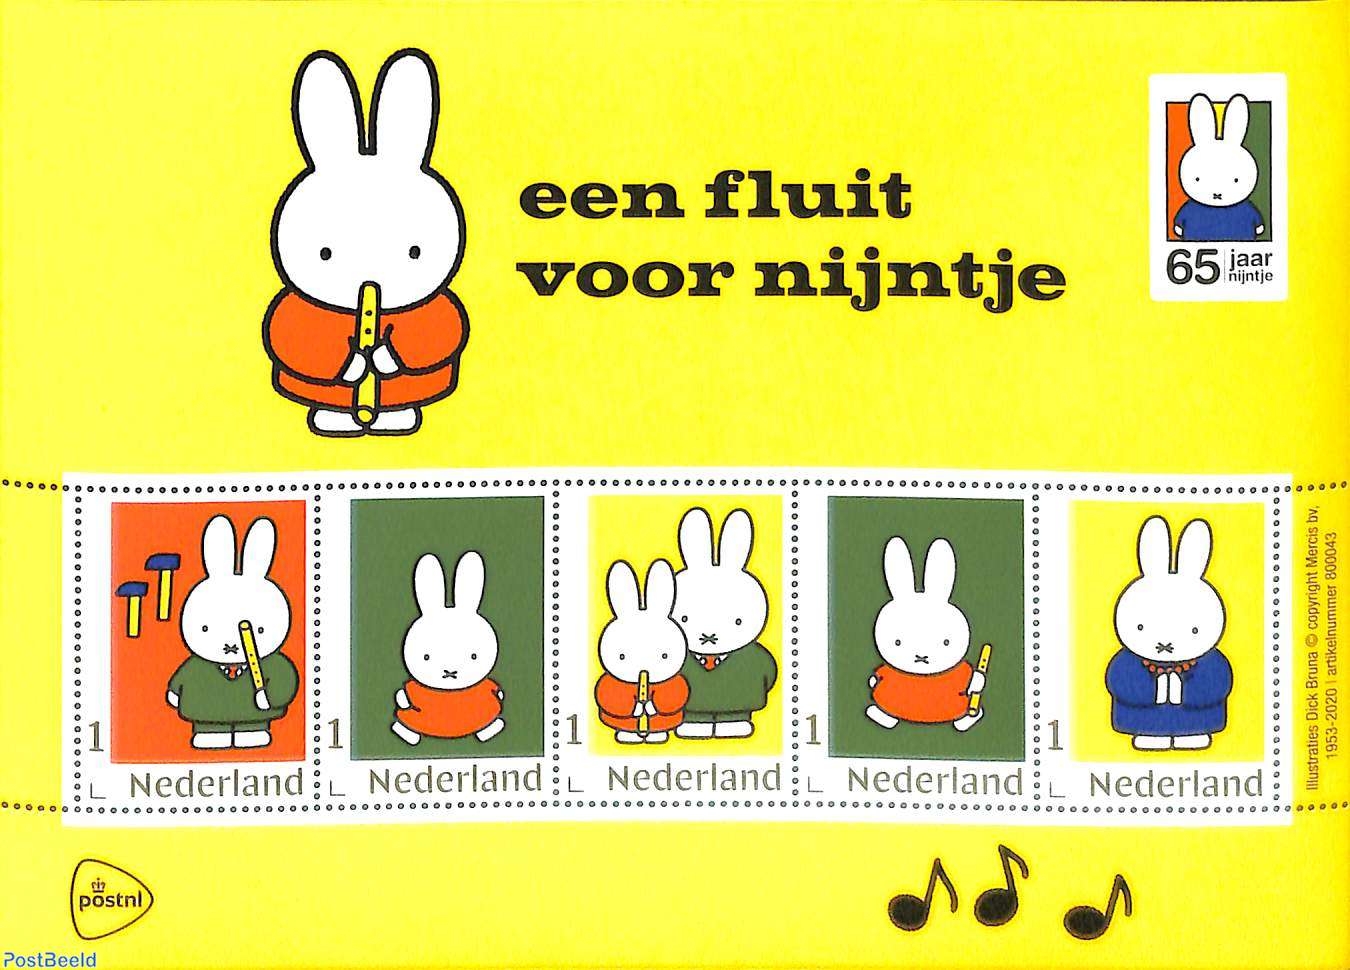 Stamp 2020, Netherlands - Personal stamps Een Fluit voor 5v m/s, 2020 - Collecting Stamps - Freestampcatalogue.com - The free online stampcatalogue with over 500.000 stamps